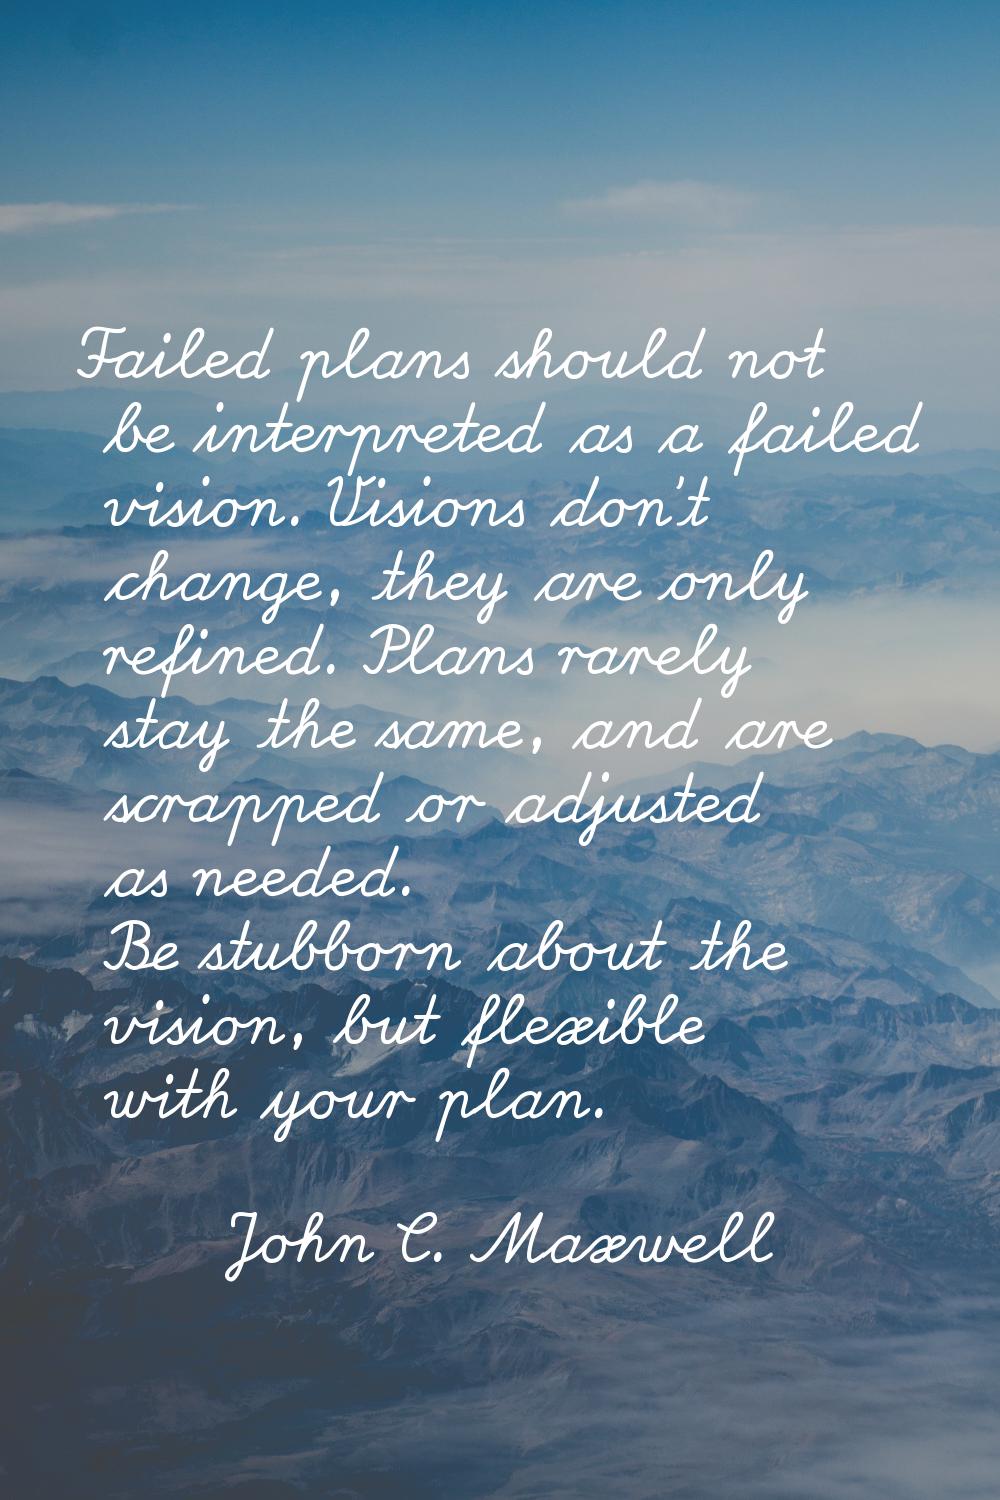 Failed plans should not be interpreted as a failed vision. Visions don't change, they are only refi